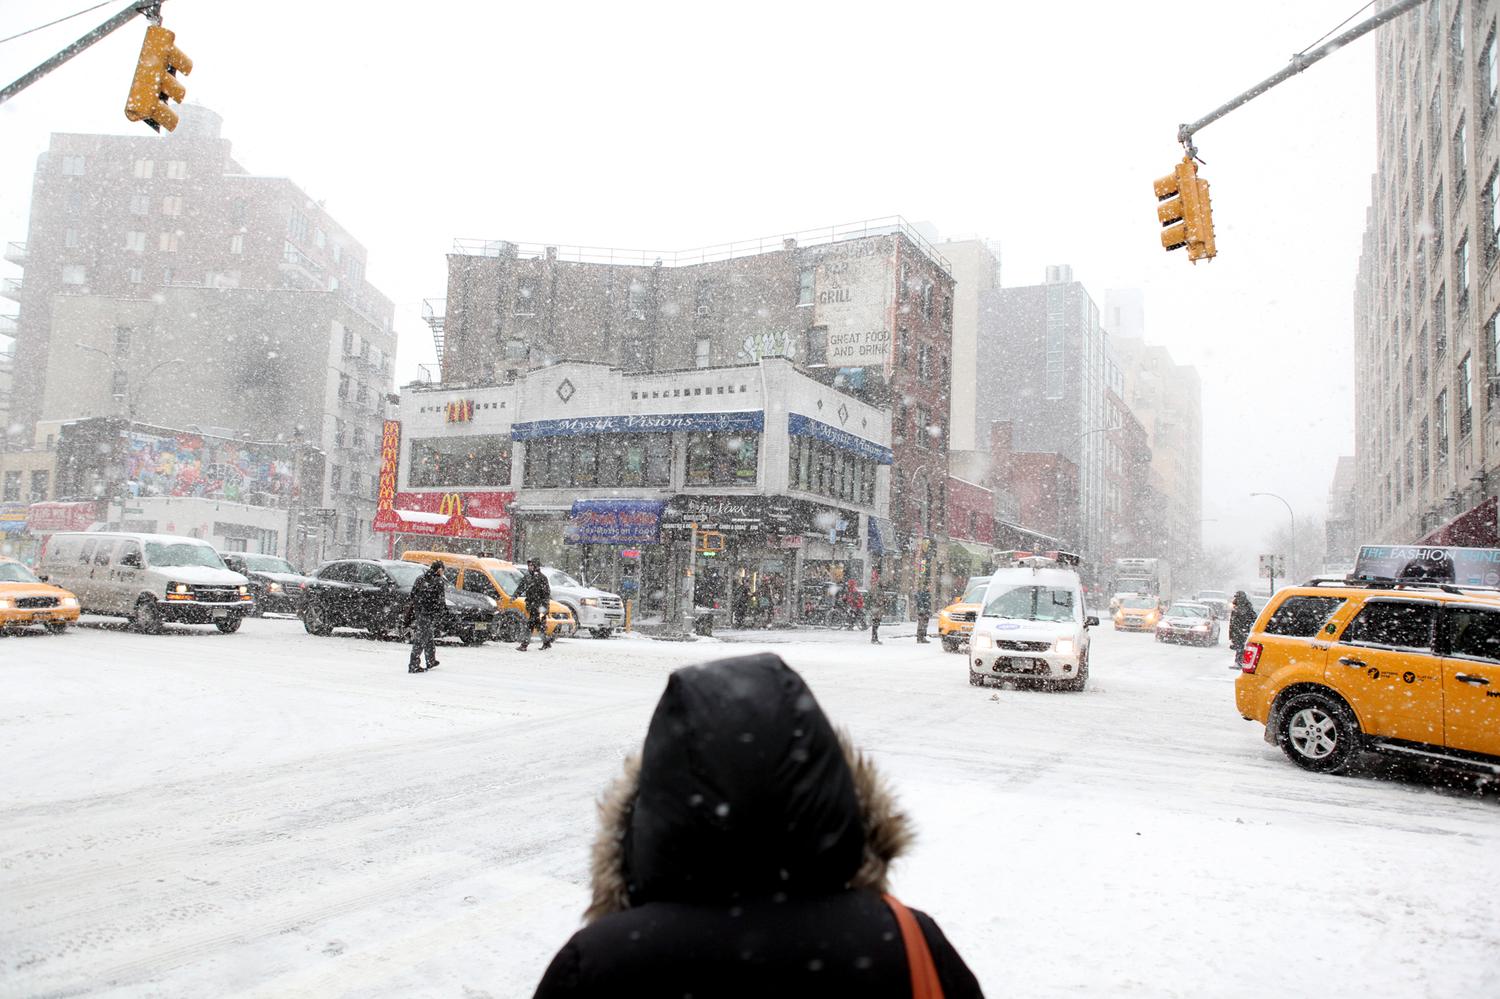 Up or Down? When It Comes to Wipers, There's Snow Consensus, WNYC News